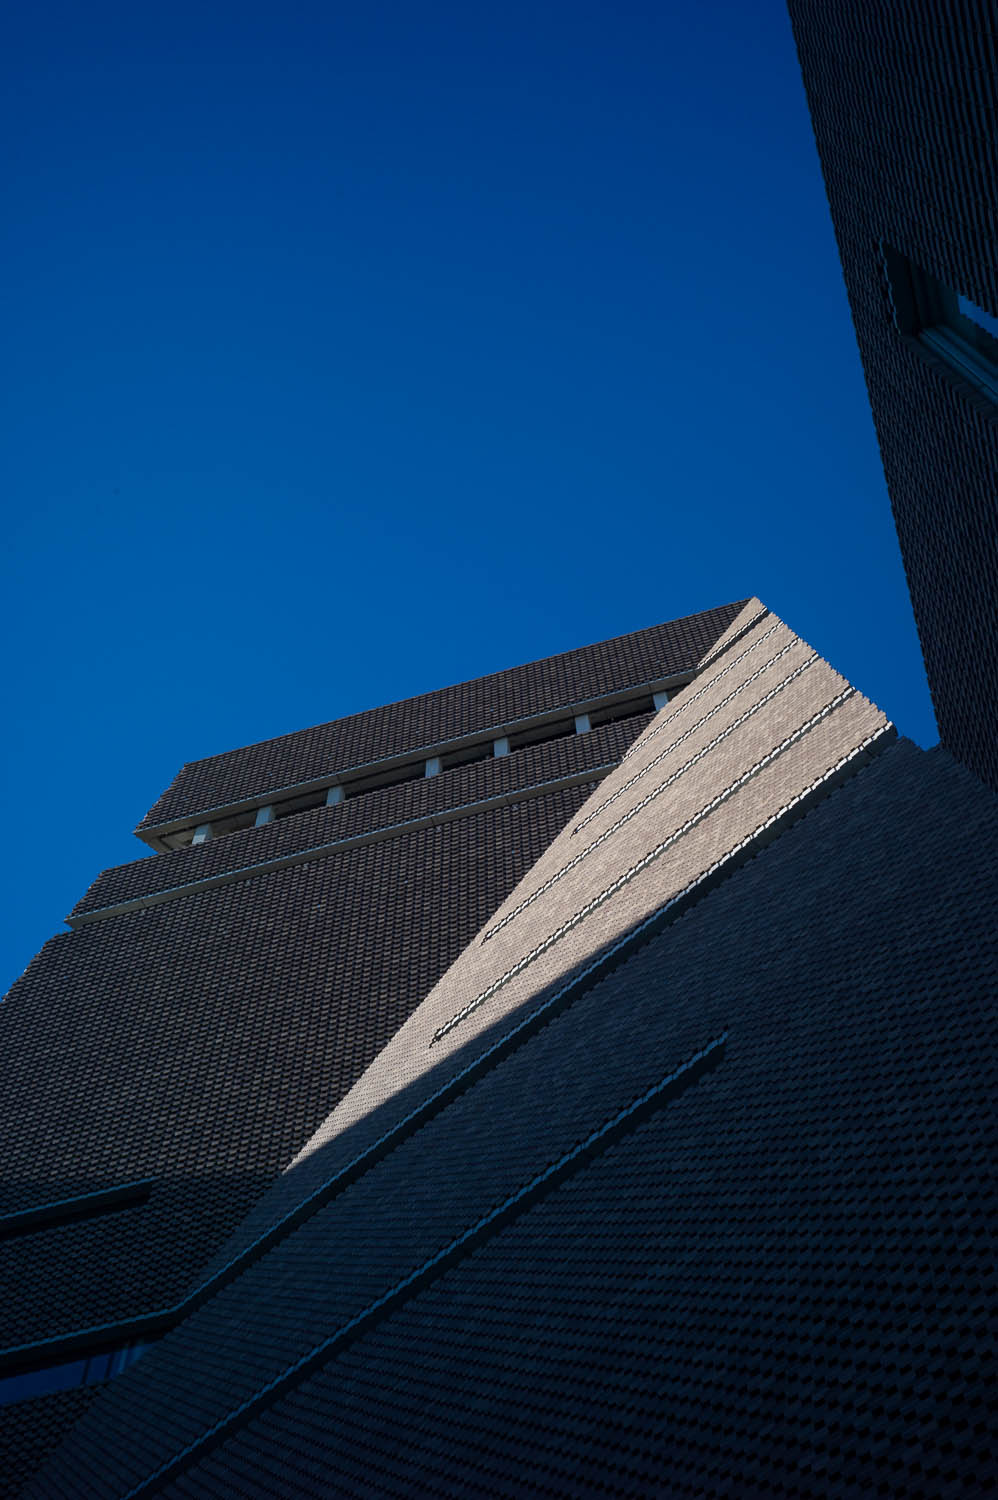 A triangle of sunlight fills a creased building at the Tate Modern museum